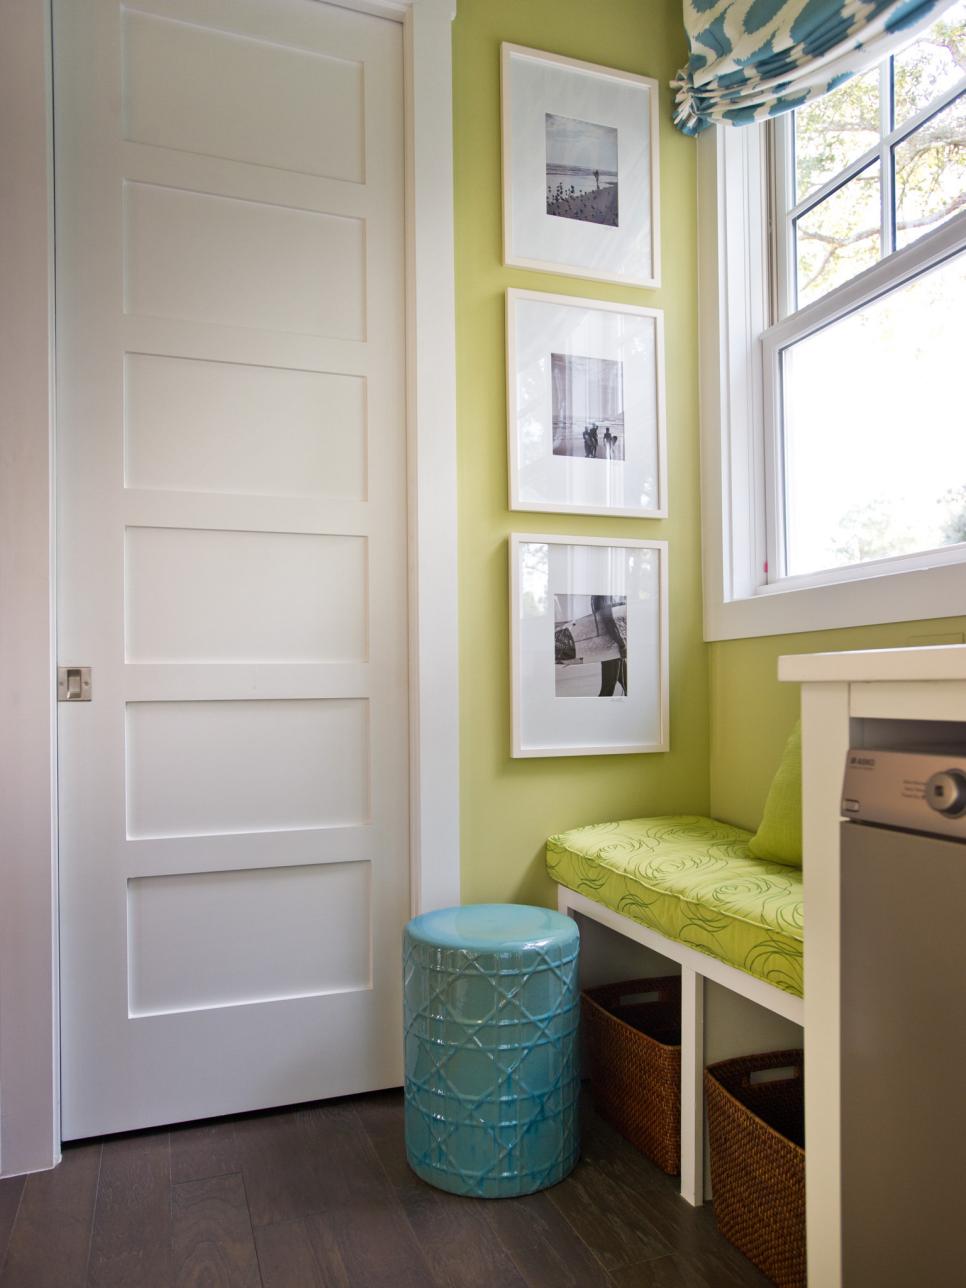 Contemporary laundry room in green and white, with built-in bench.